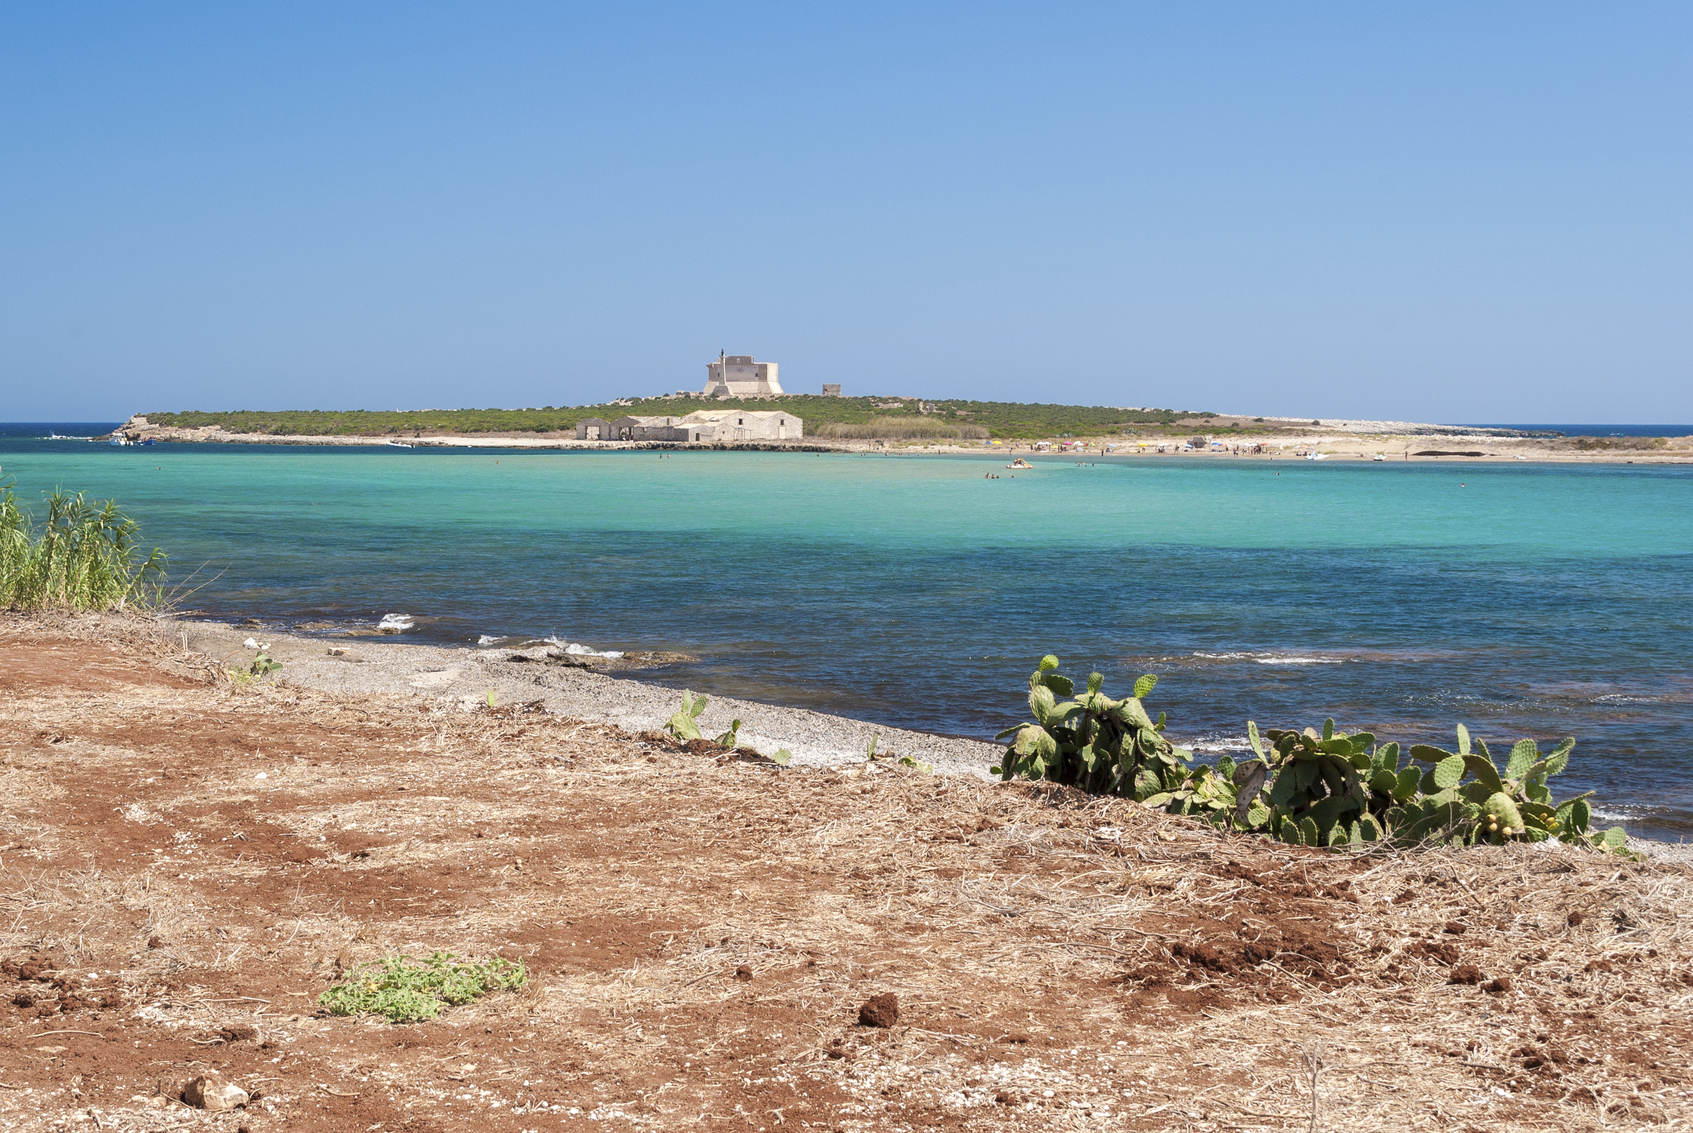 The island of "Capo Passero" in southern Sicily during the summer